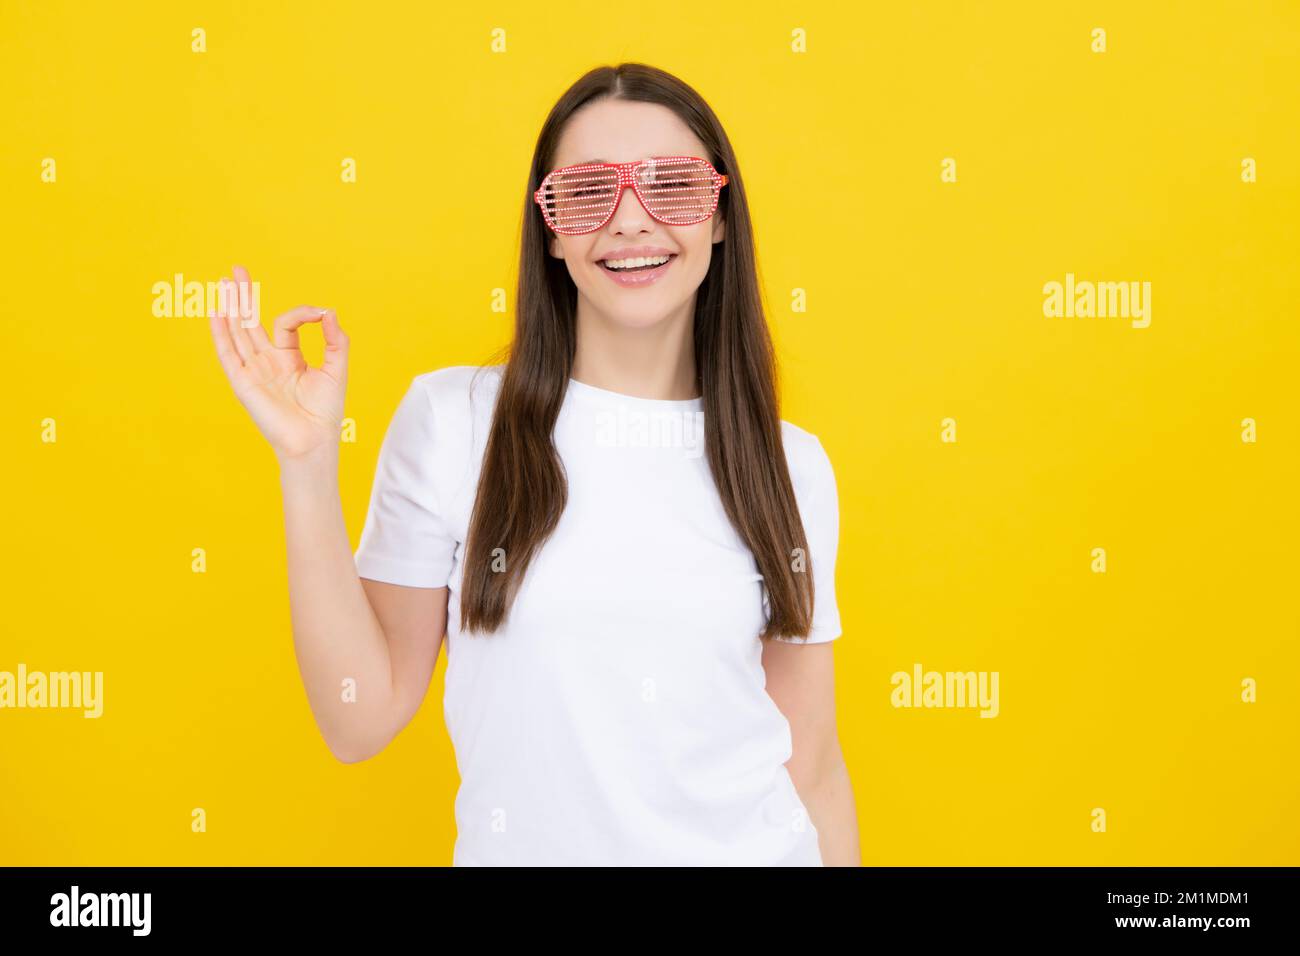 Portrait of beautiful woman with funny glasses. Celebration and party. Girl having fun, portrait on yellow background. Stock Photo